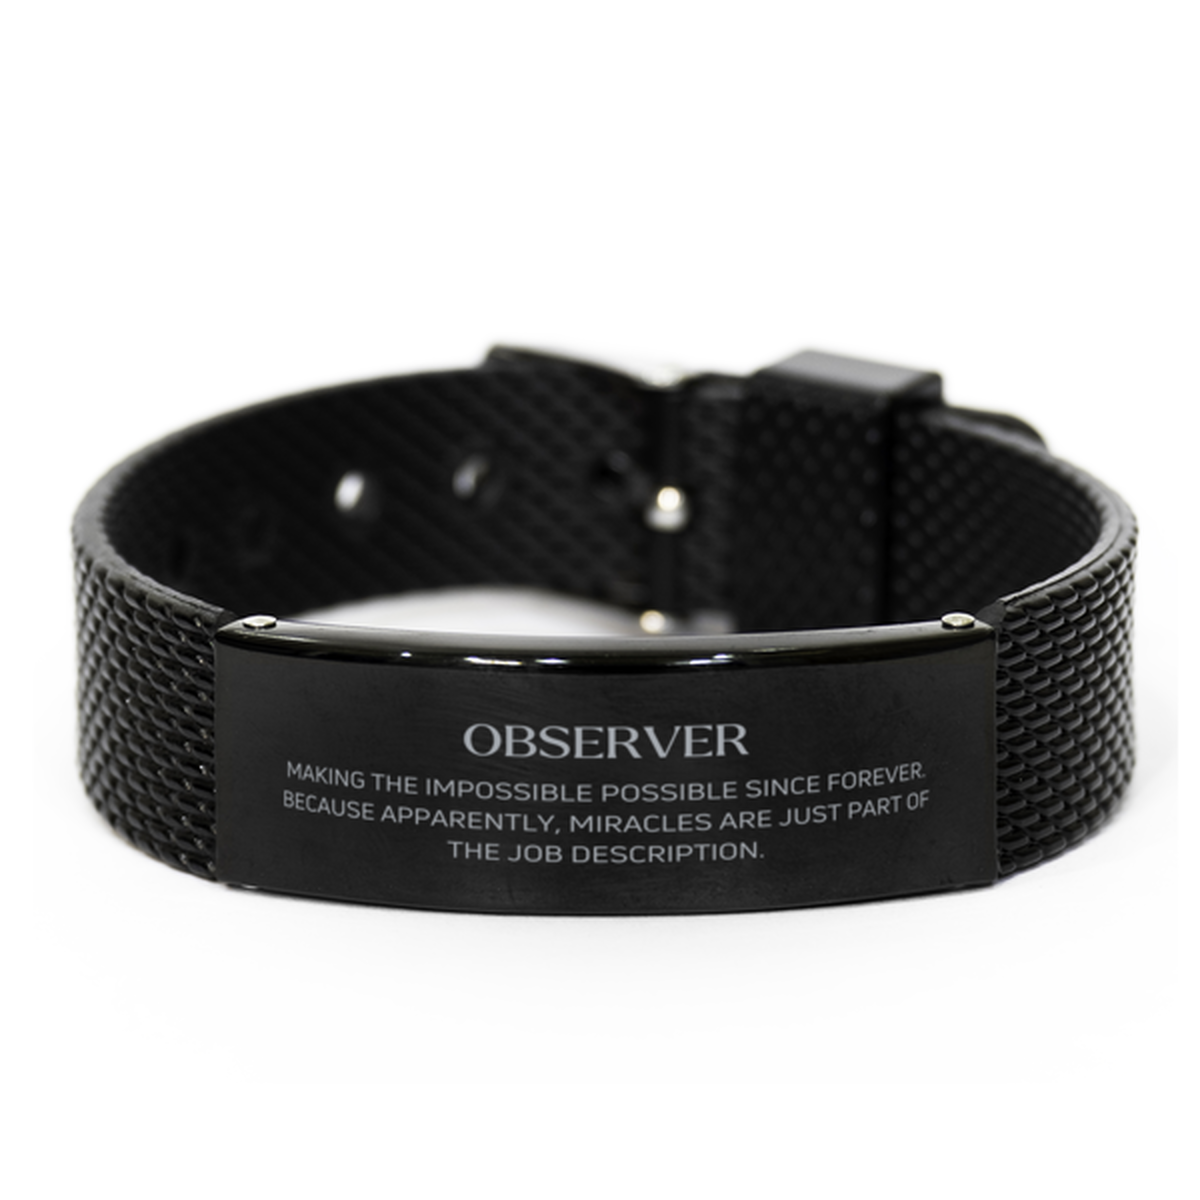 Funny Observer Gifts, Miracles are just part of the job description, Inspirational Birthday Black Shark Mesh Bracelet For Observer, Men, Women, Coworkers, Friends, Boss